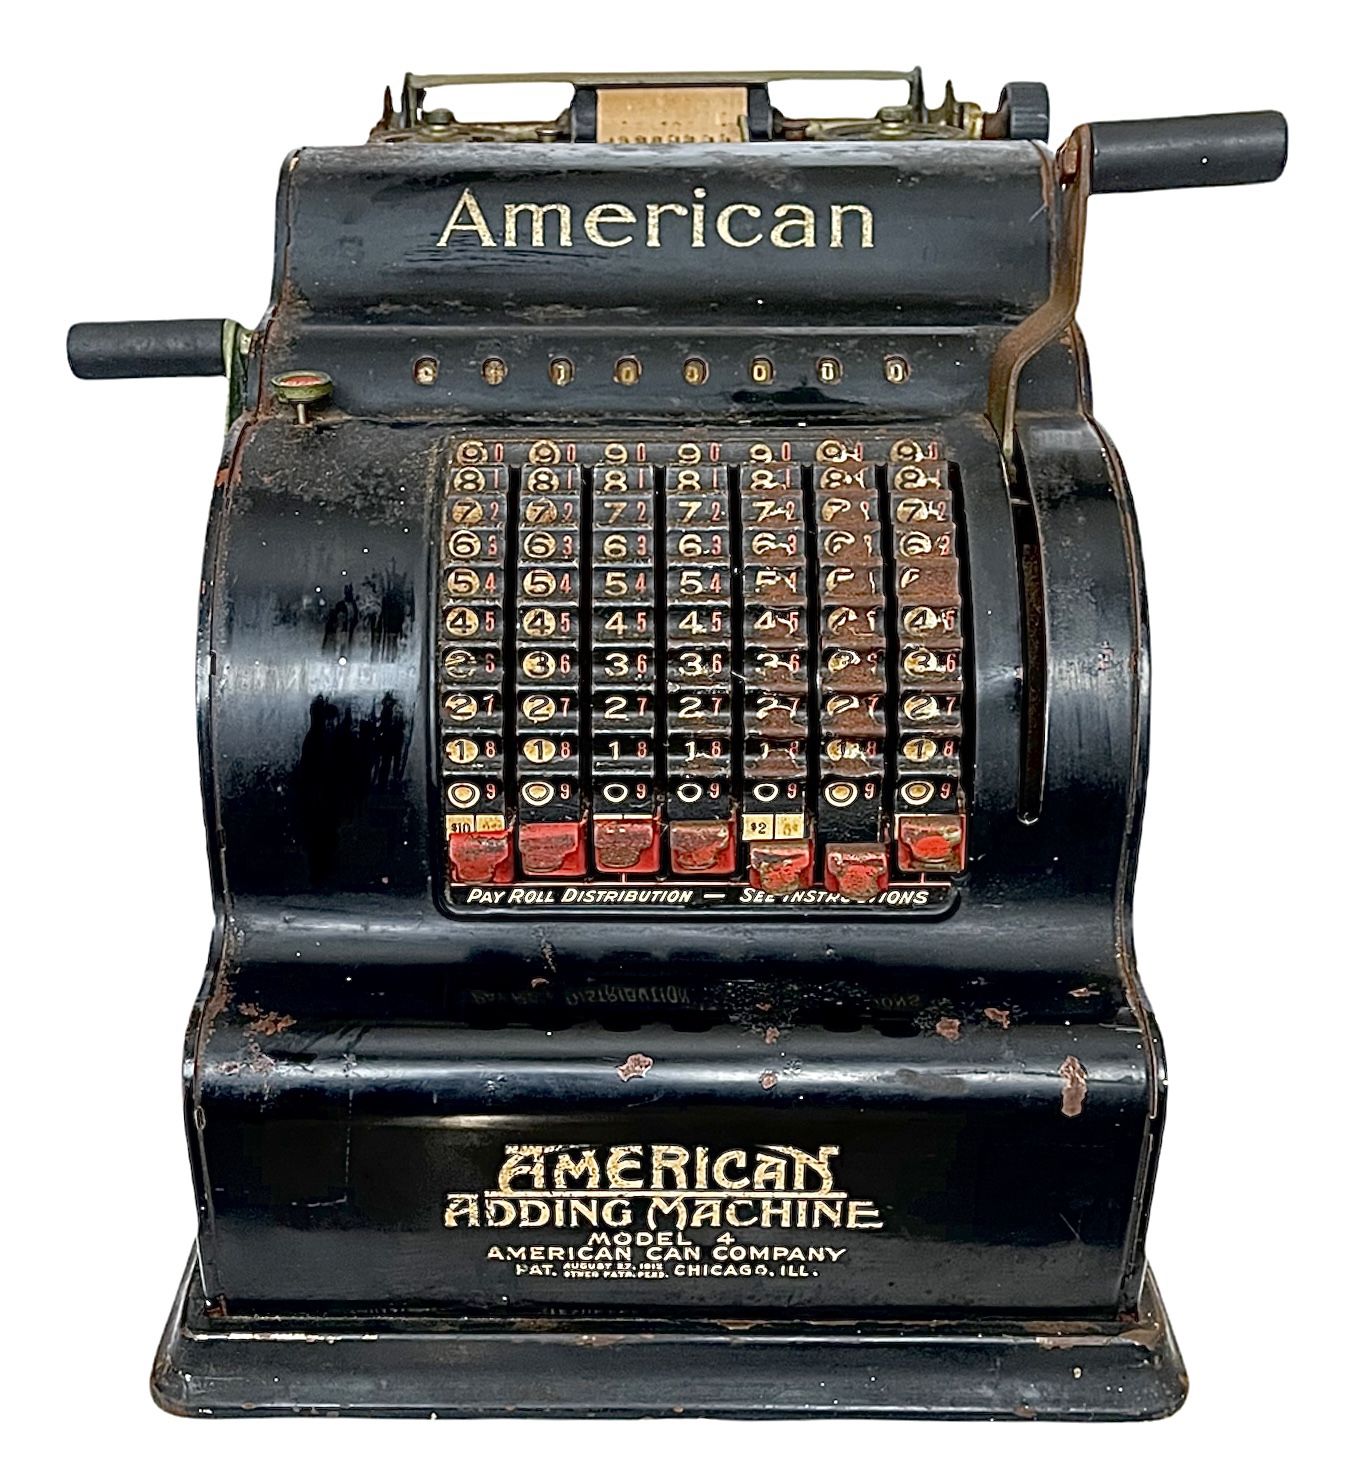 Antique American Adding Machine Model 4 1(contact info removed)